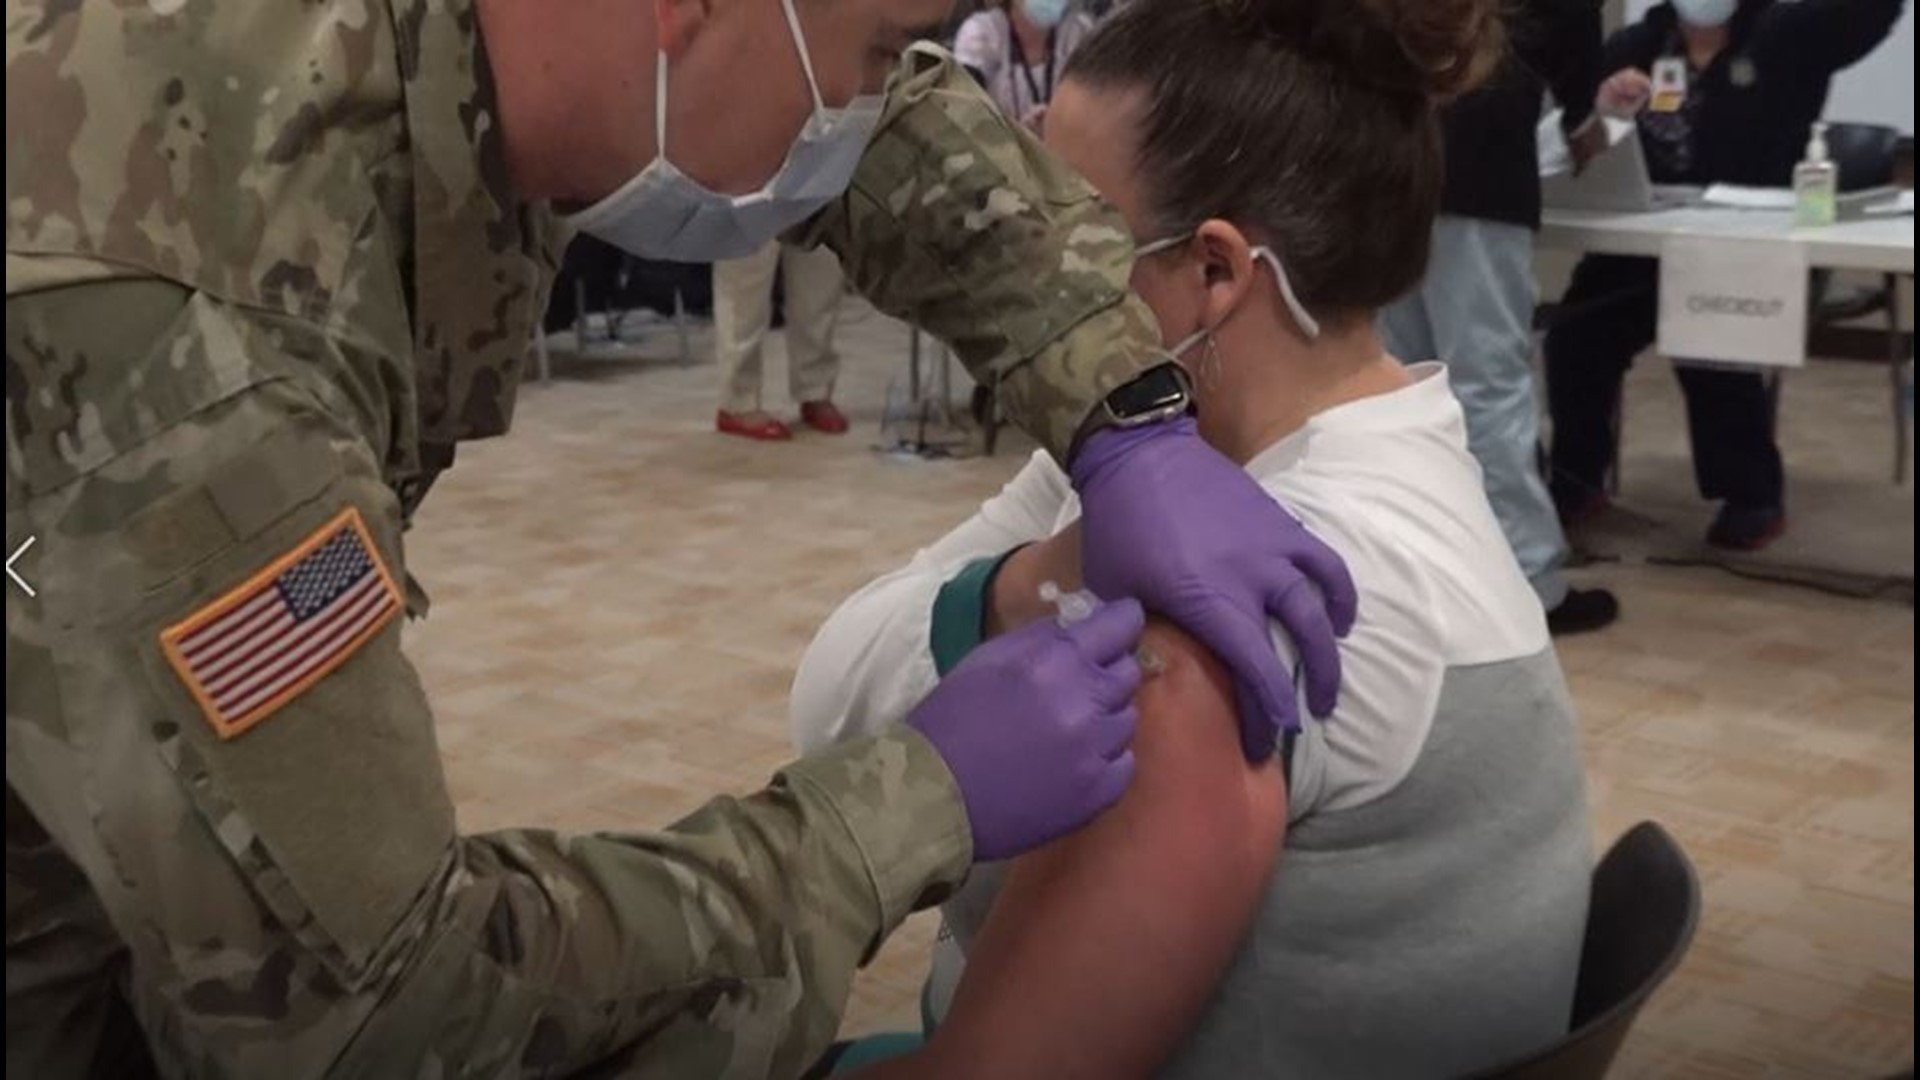 The Carl R. Darnall Army Medical center held a town hall to answer some burning questions surrounding their vaccine process.